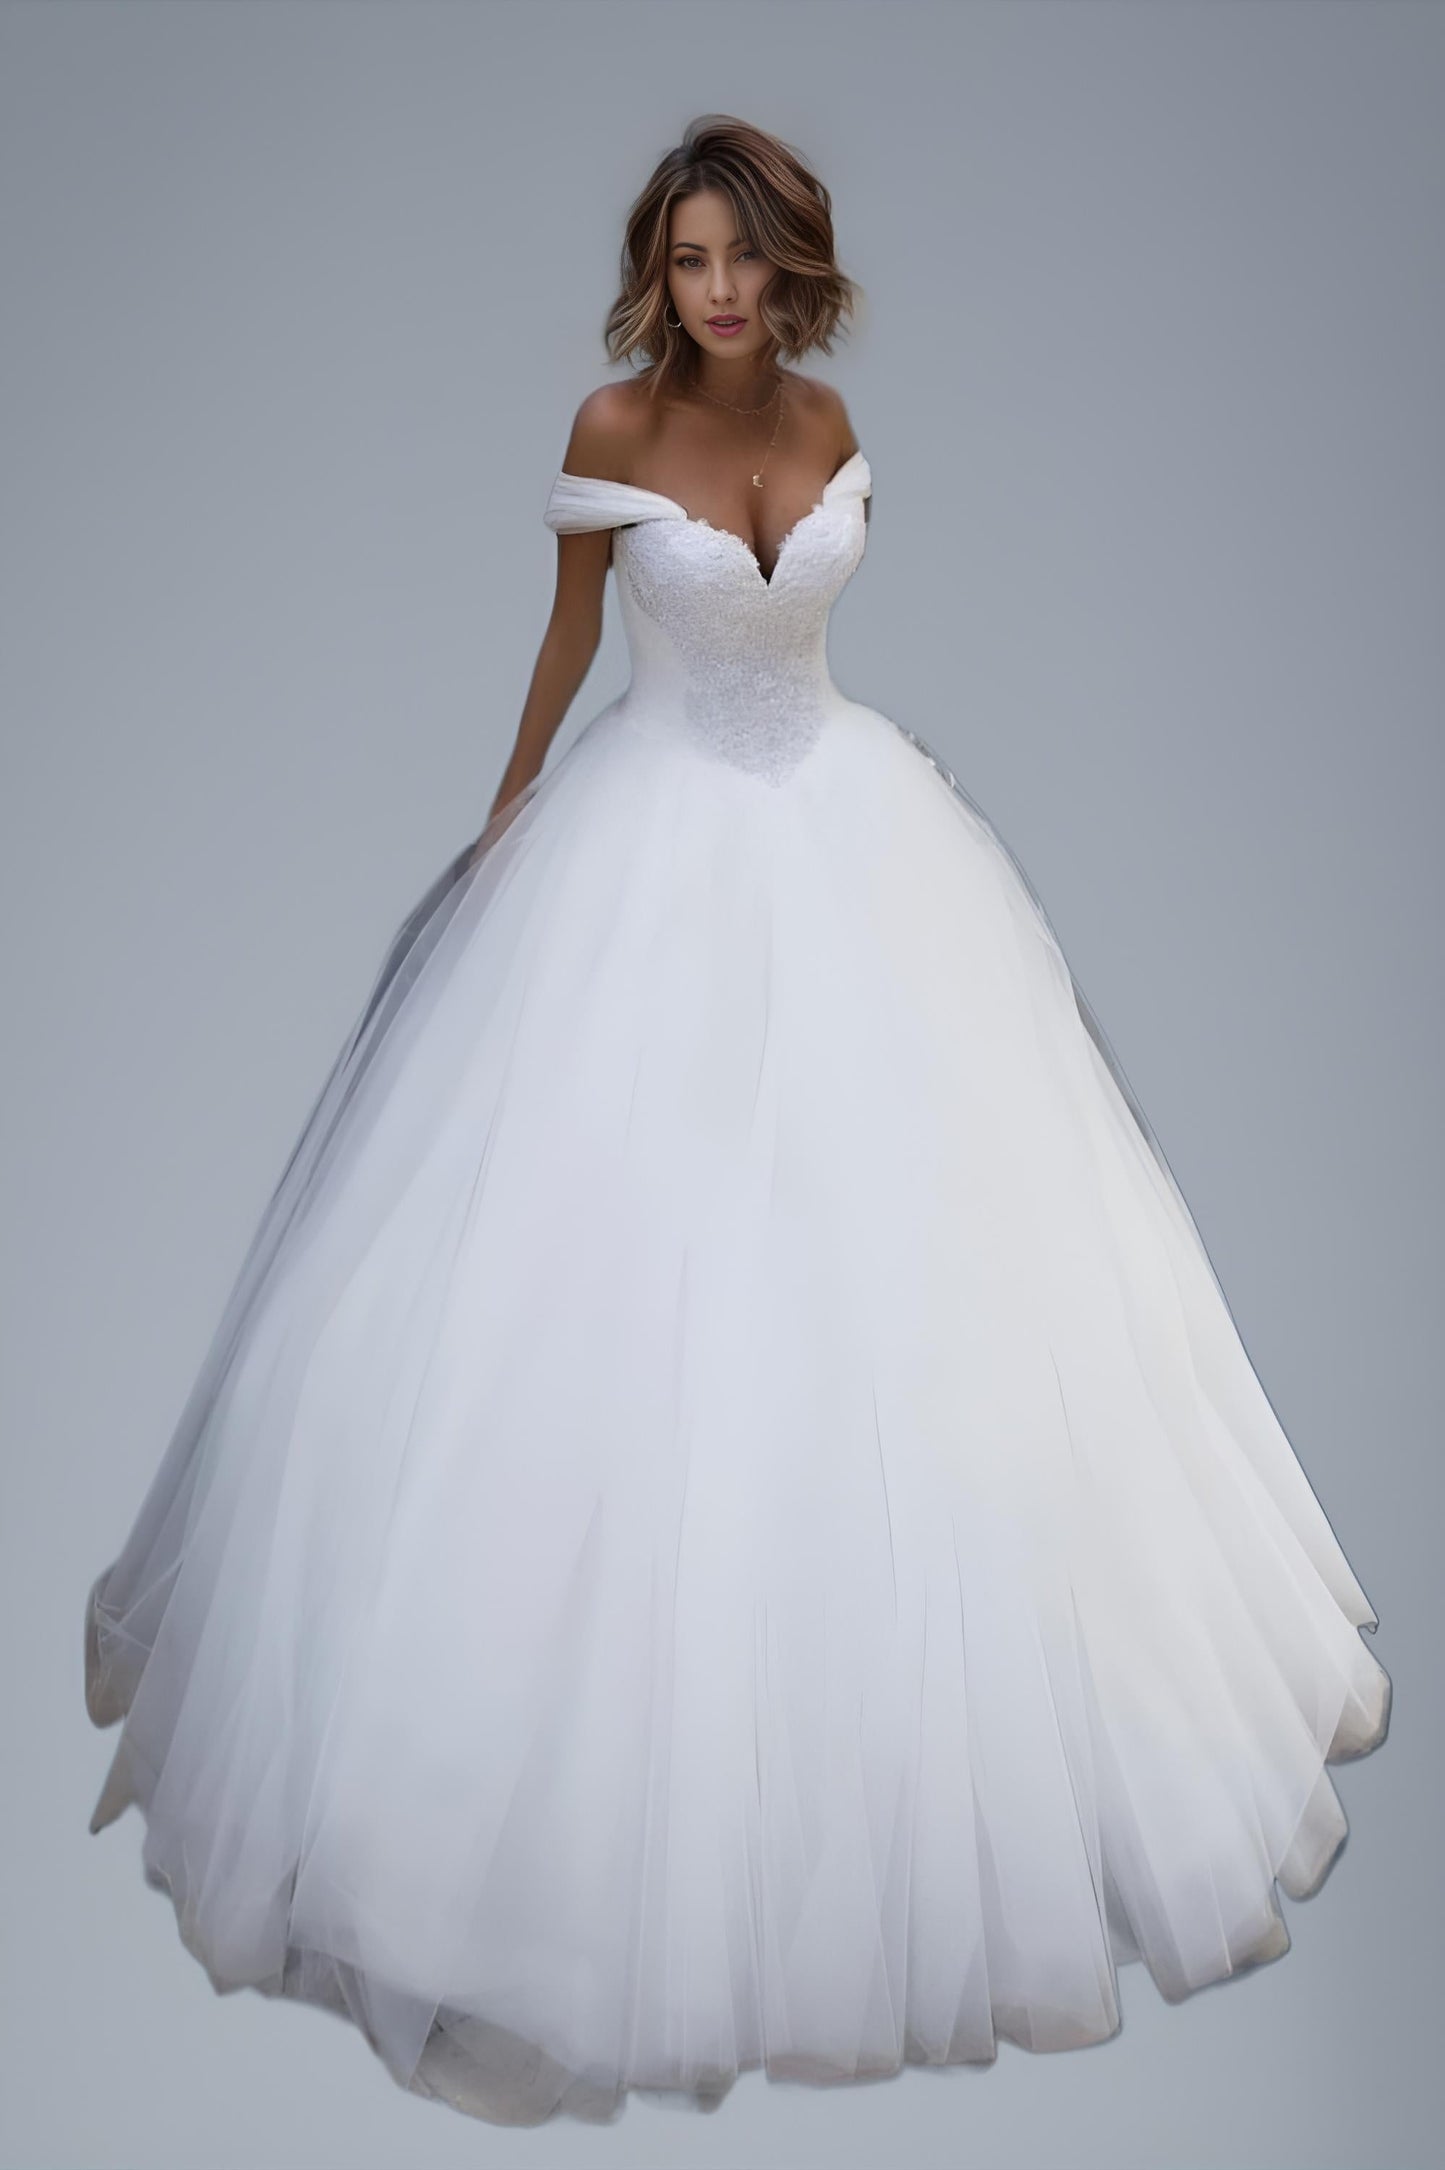 Princess Ball Gown Wedding Dress - Stunning lace appliques and beading and off-the-shoulder sweetheart neckline